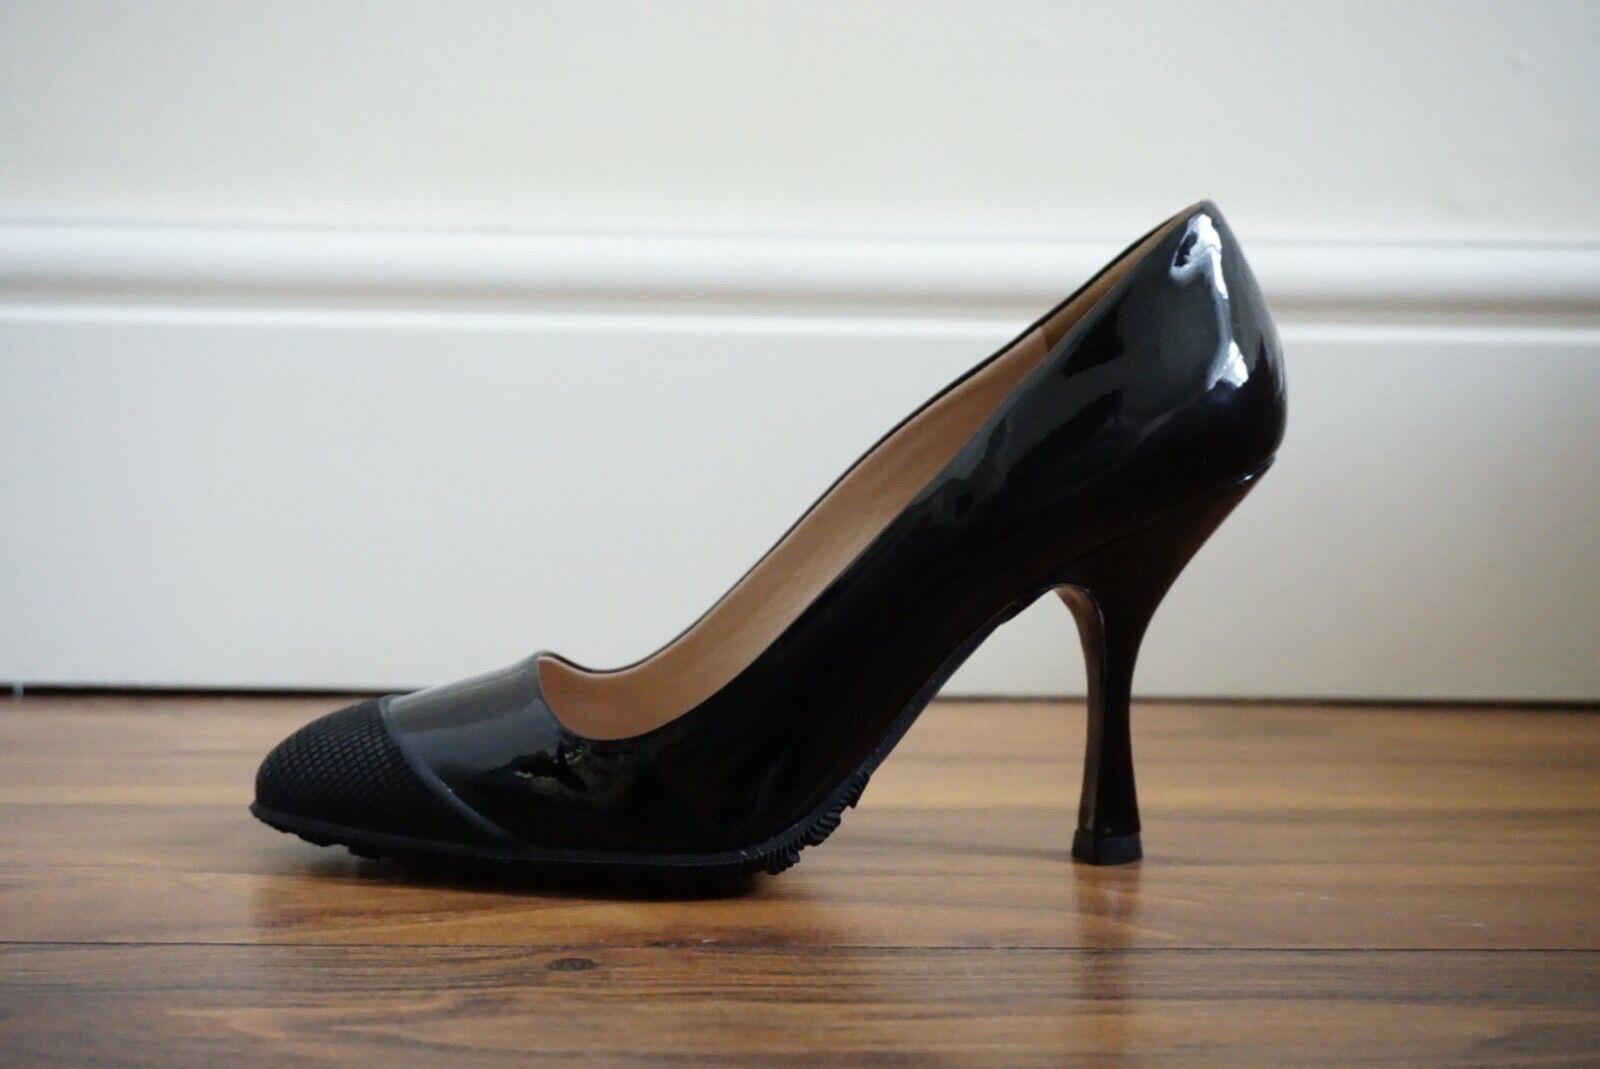 Miu Miu Vernice Patent Leather, Pointed Heels Rubber Grip Soles, Black 37.5 BNWT

100% Genuine, New with Tag.

 Box is old and in the wardrobe long years. So shoes are marked as very excellent condition.

Height: 9.5 cm.

_ _ _

Great for everyday